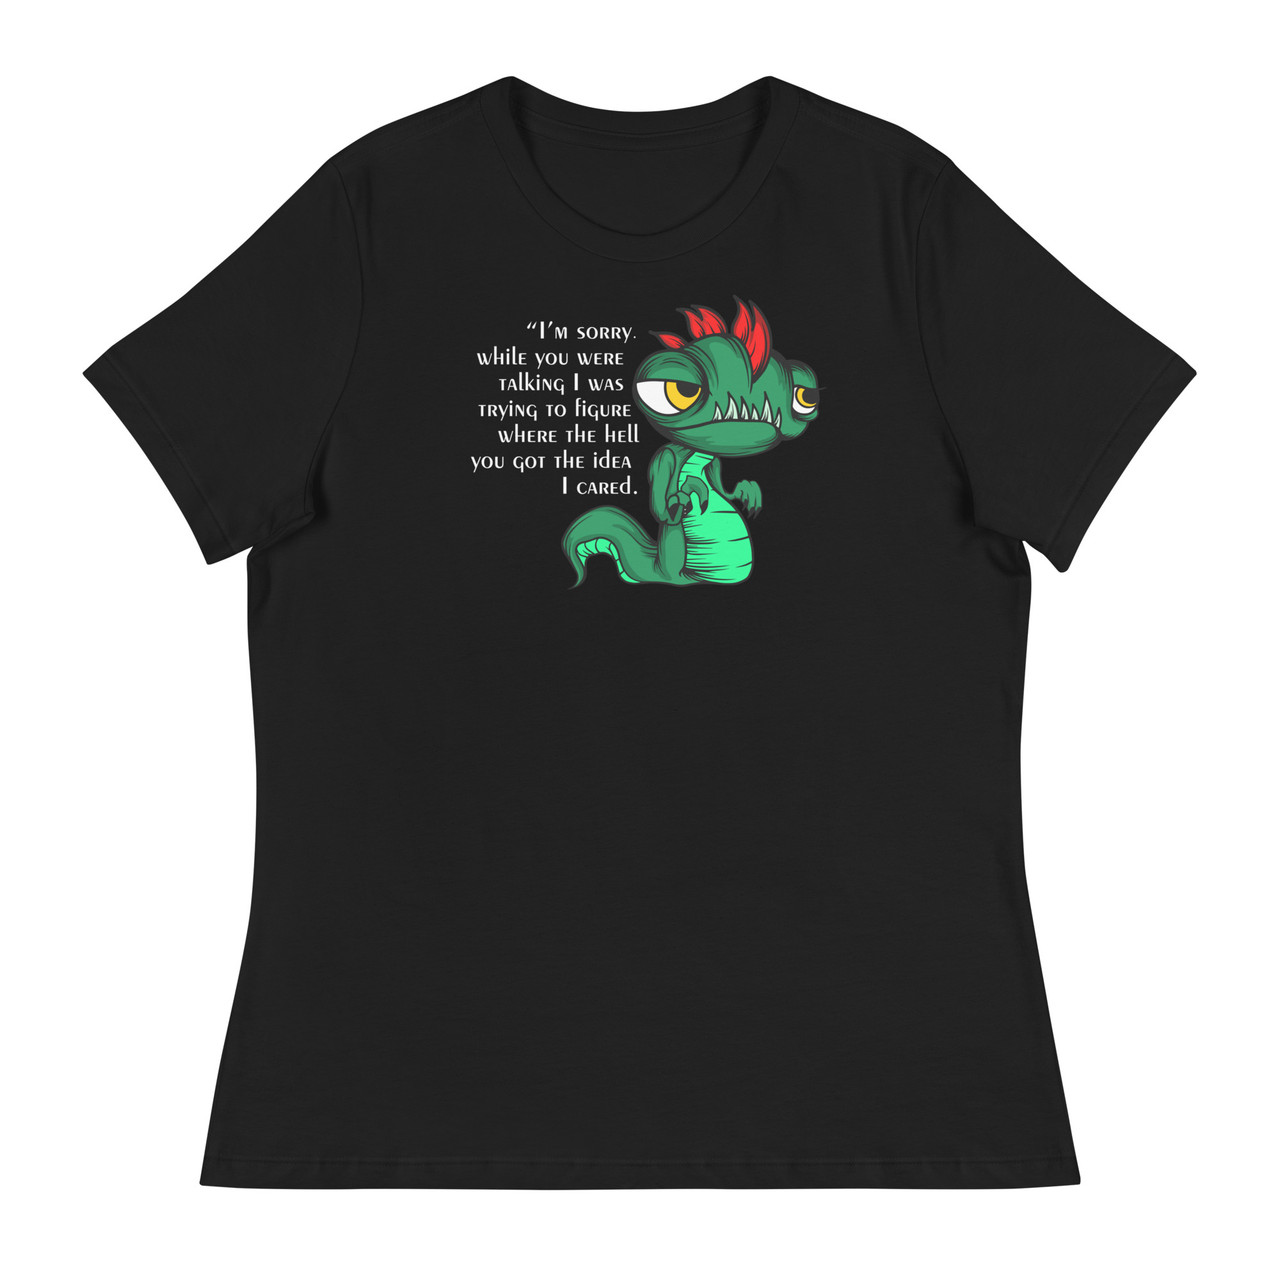 I'm sorry while you were talking Women's Relaxed T-Shirt - Bella + Canvas 6400 